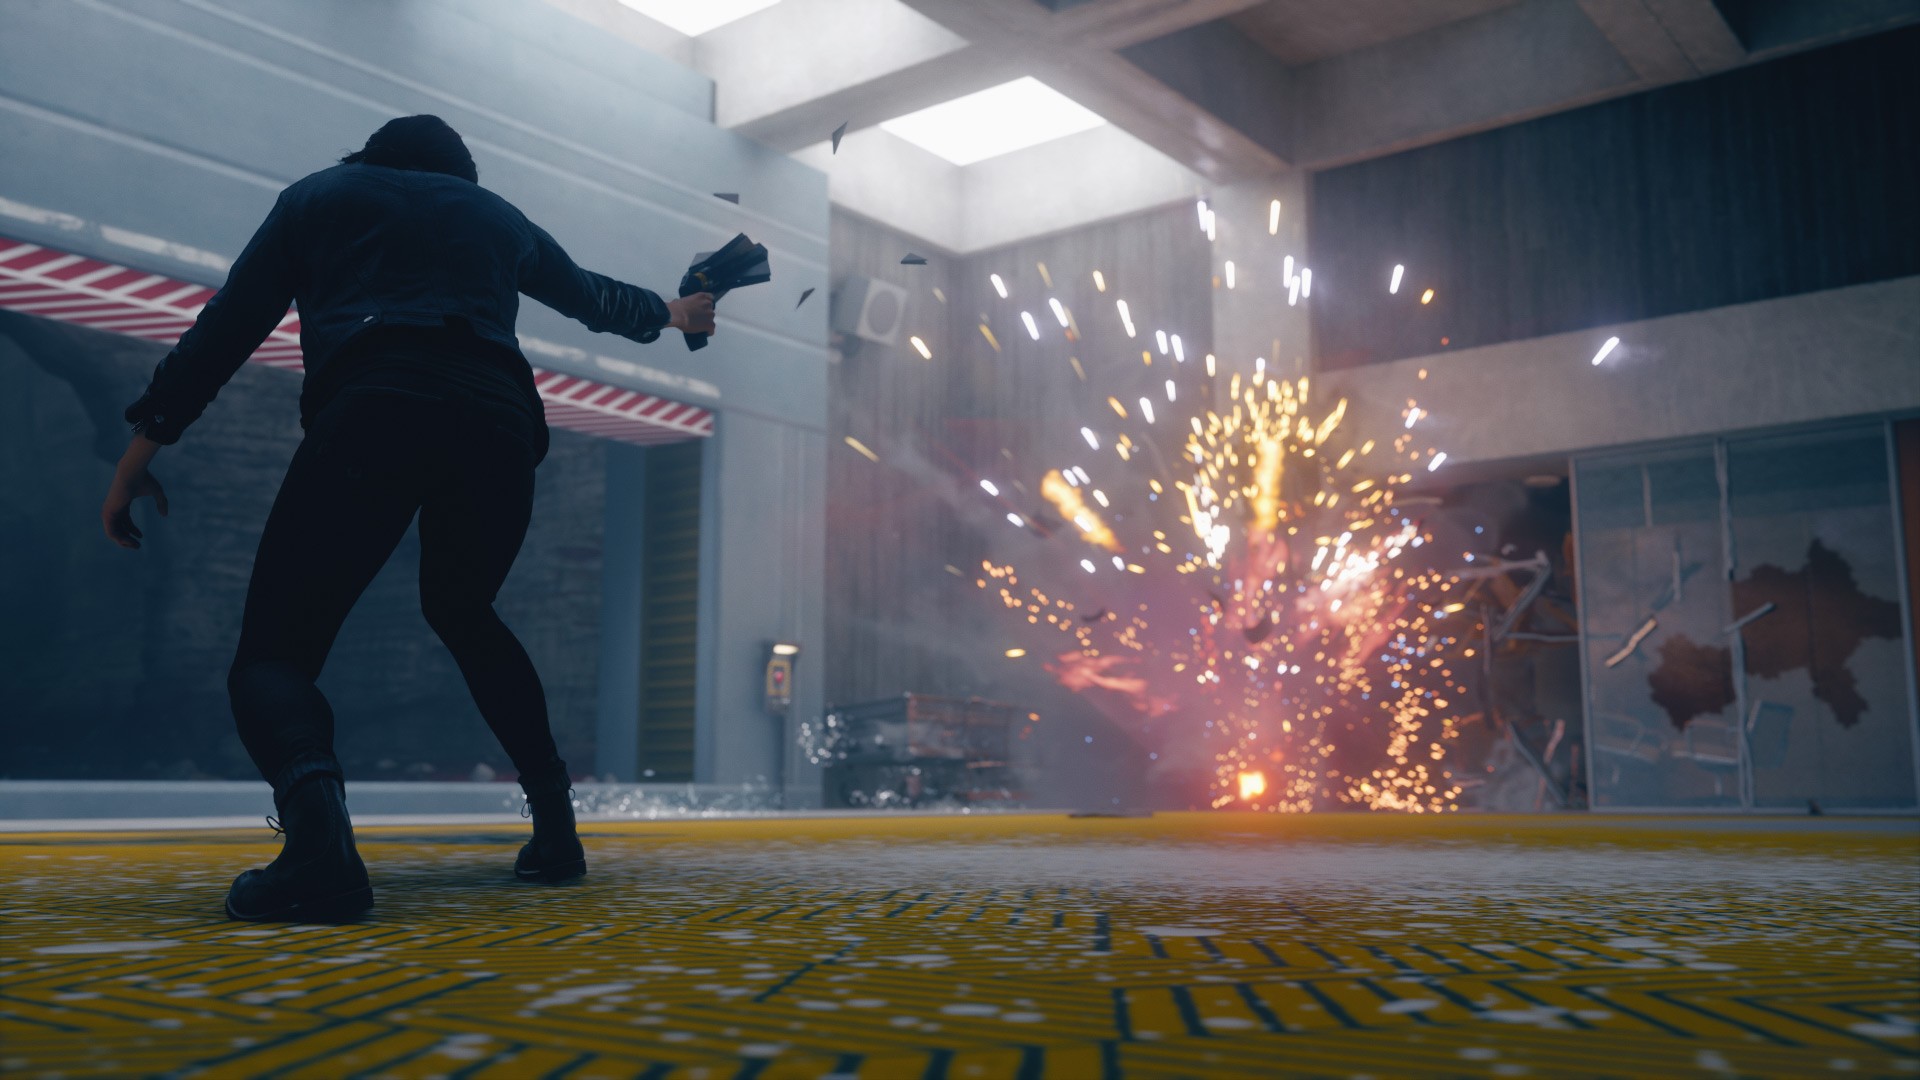 505 Games, Action, Action & Adventure, adventure, Control, Control Review, Control: The Foundation, Control: The Foundation Review, Female Protagonist, PS4, PS4 Review, Rating 6/10, Remedy Entertainment, Sci-Fi, Video Game, Video Game Review